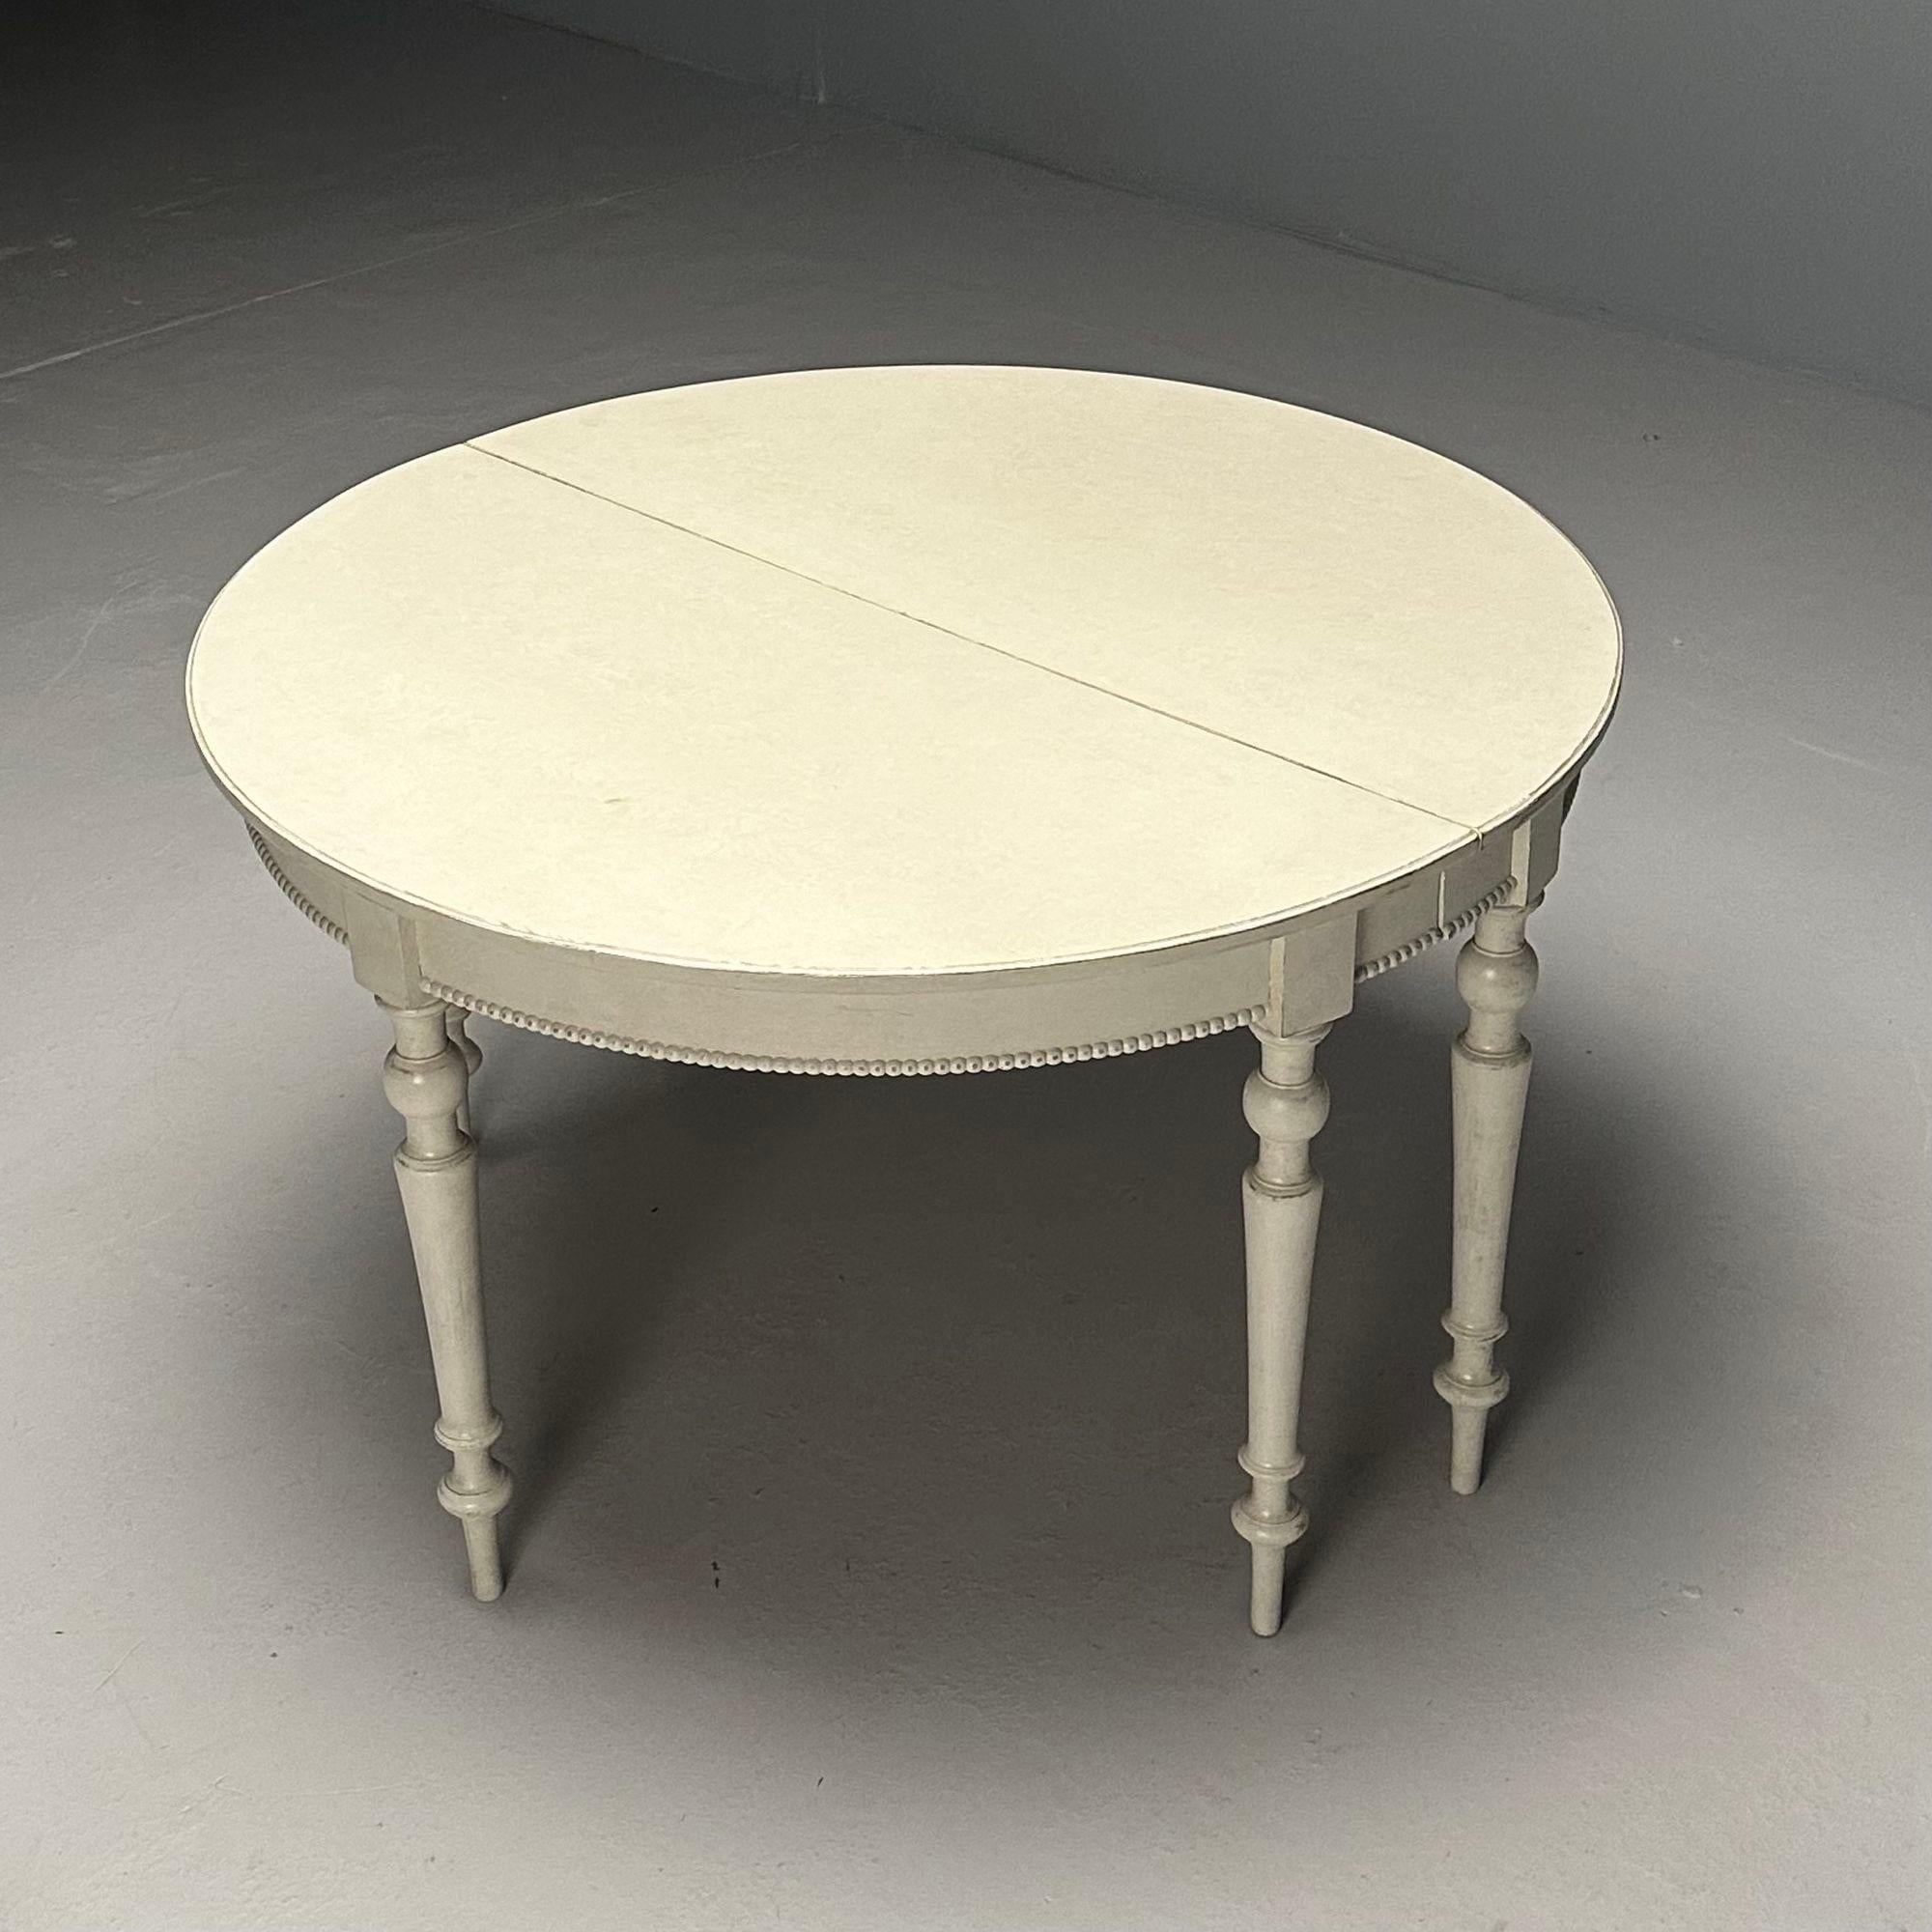 Gustavian, Large Swedish Dining Table, Gray Paint Distressed, Sweden, 1970s For Sale 2